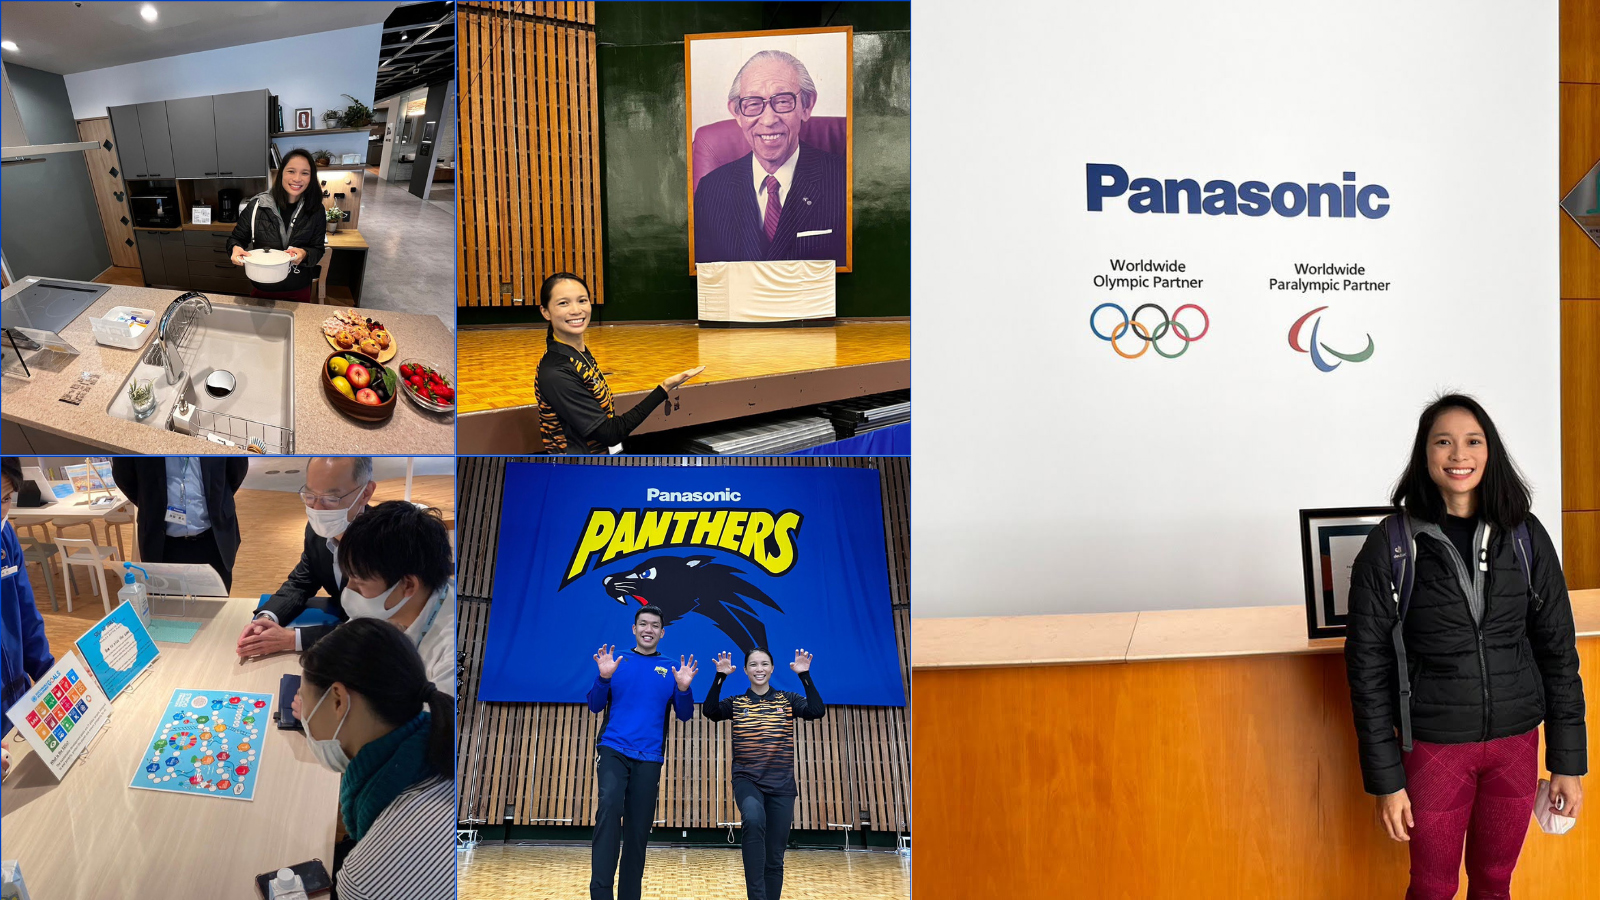 Photo: The internship offered Tania an opportunity to interact with young employees at Panasonic and gain first-hand experience of a large company workplace